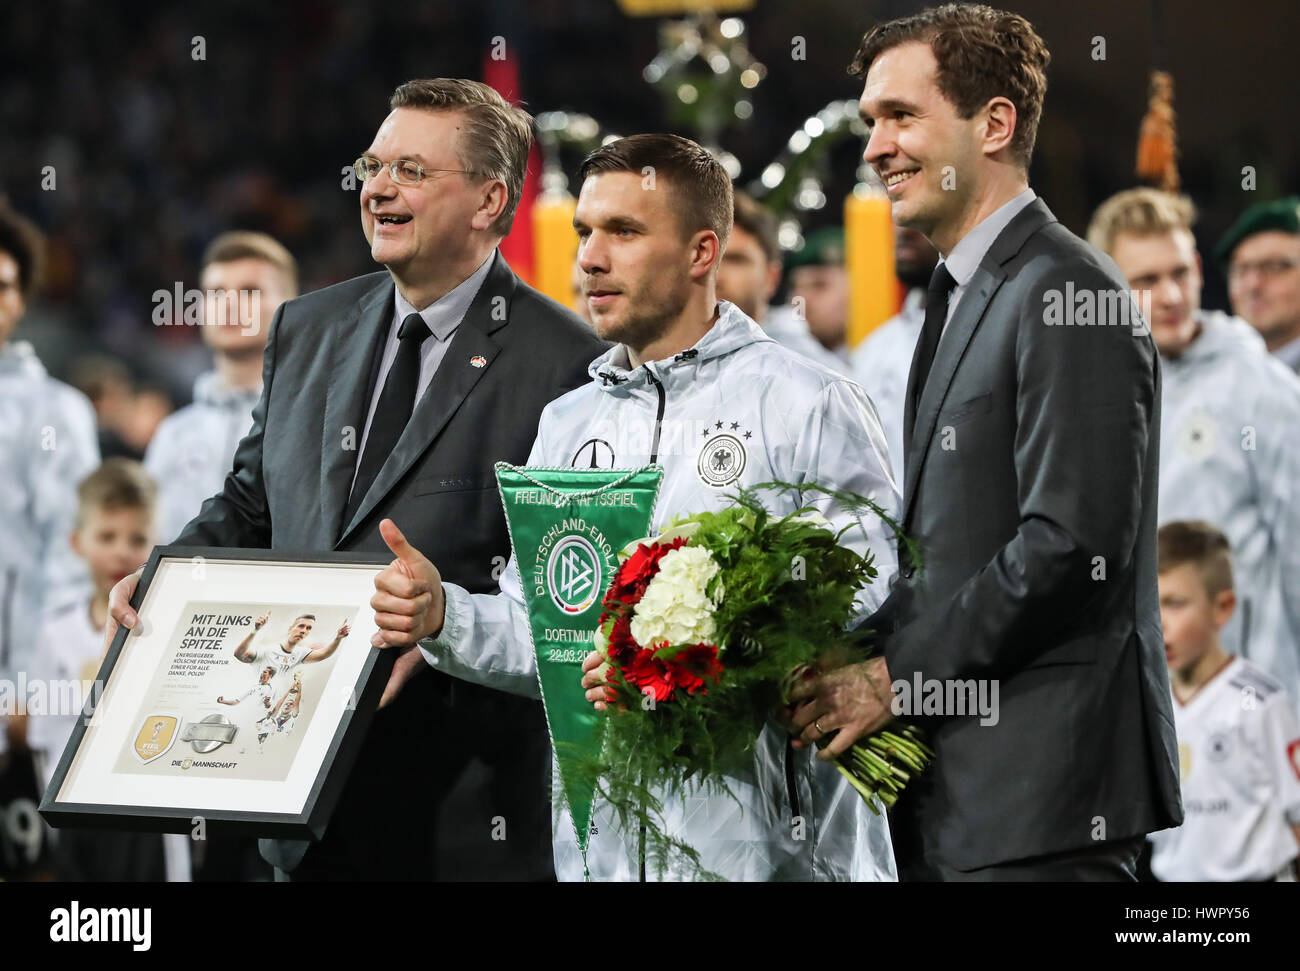 Dortmund, Germany. 22nd Mar, 2017. Germany's Lukas Podolski (C) receives an award from German Football Association before an international friendly match between Germany and England in Dortmund, Germany, on March 22, 2017. Germany won 1-0 and Germany's Lukas Podolski retired from German national team after this match. Credit: Shan Yuqi/Xinhua/Alamy Live News Stock Photo